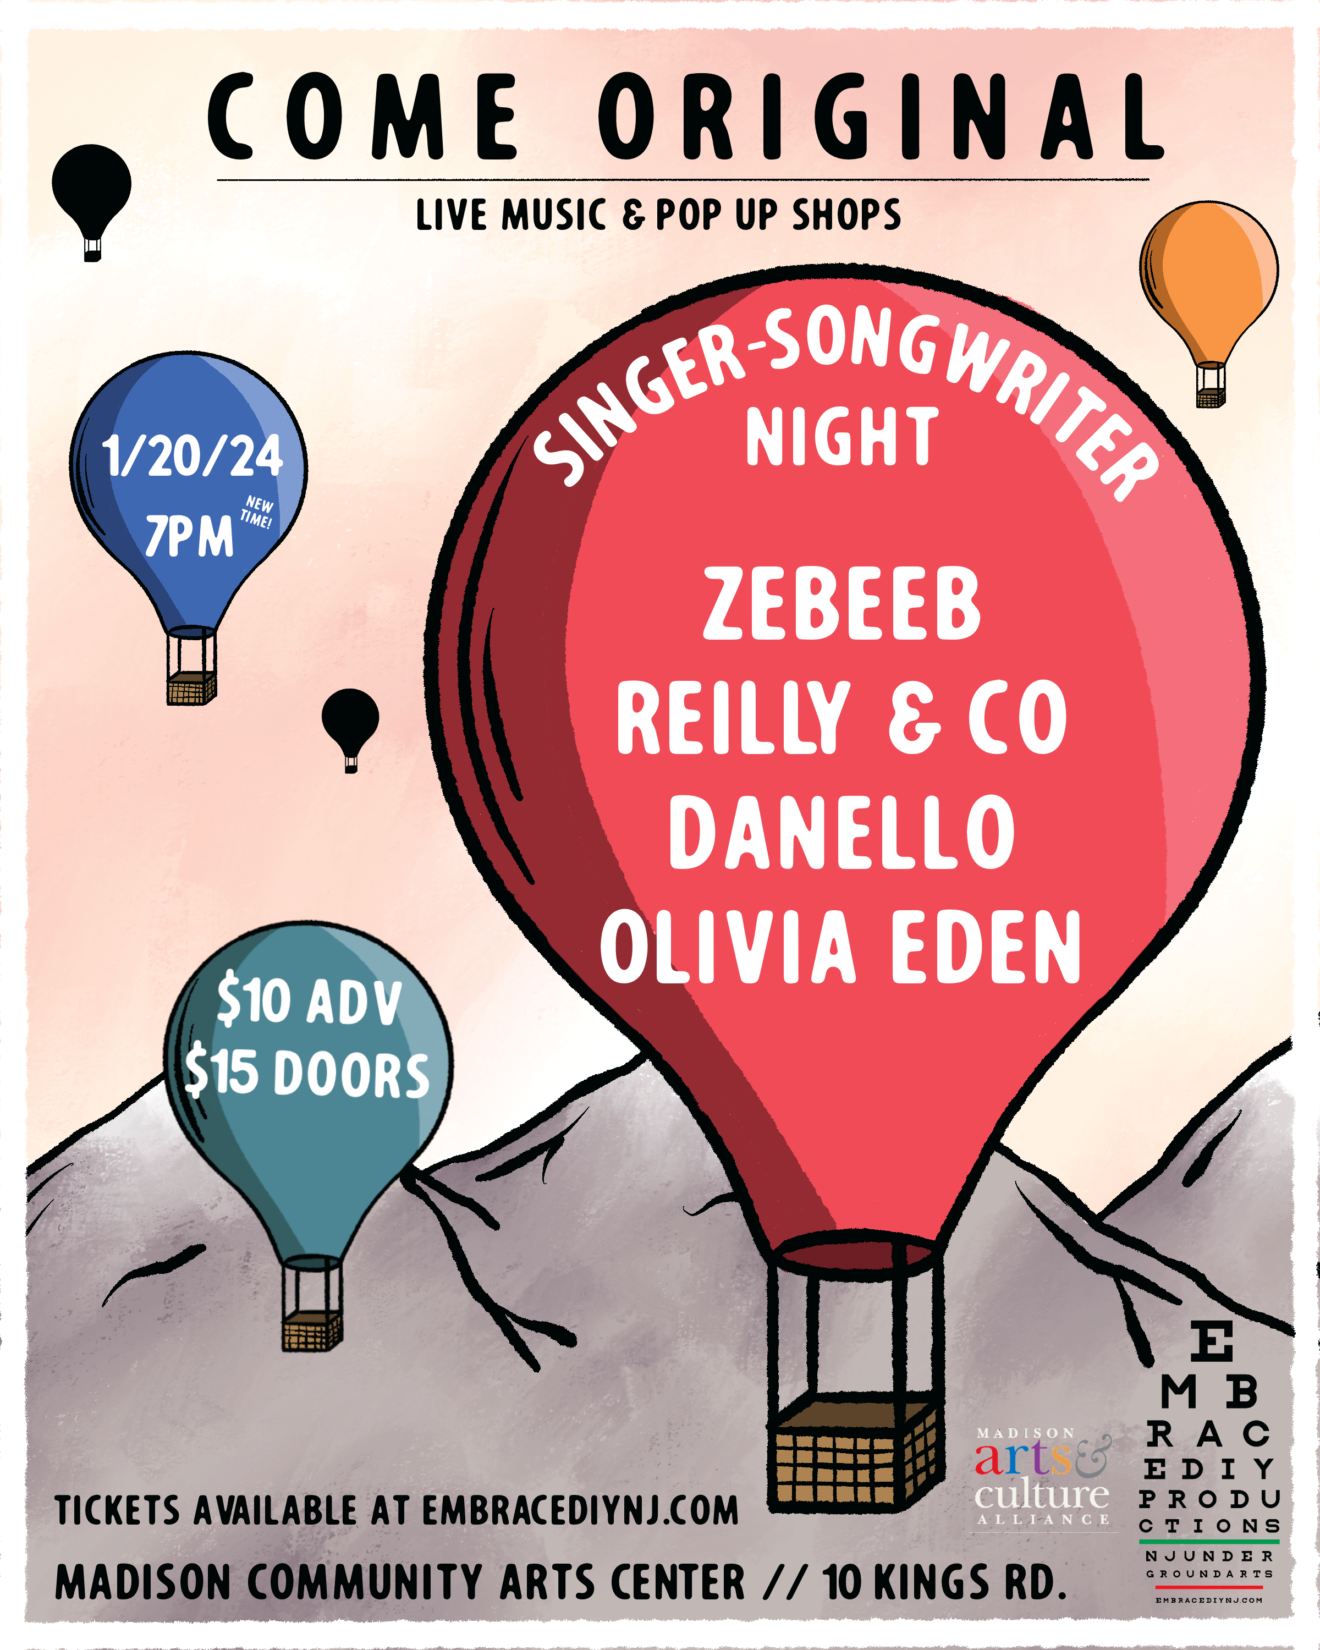 Come Original: Live Music Showcase & Pop-Up Shops | Singer-Songwriter Night | Saturday January 20 2024 | Doors Open 7:00 pm | Show Starts 7:30 pm